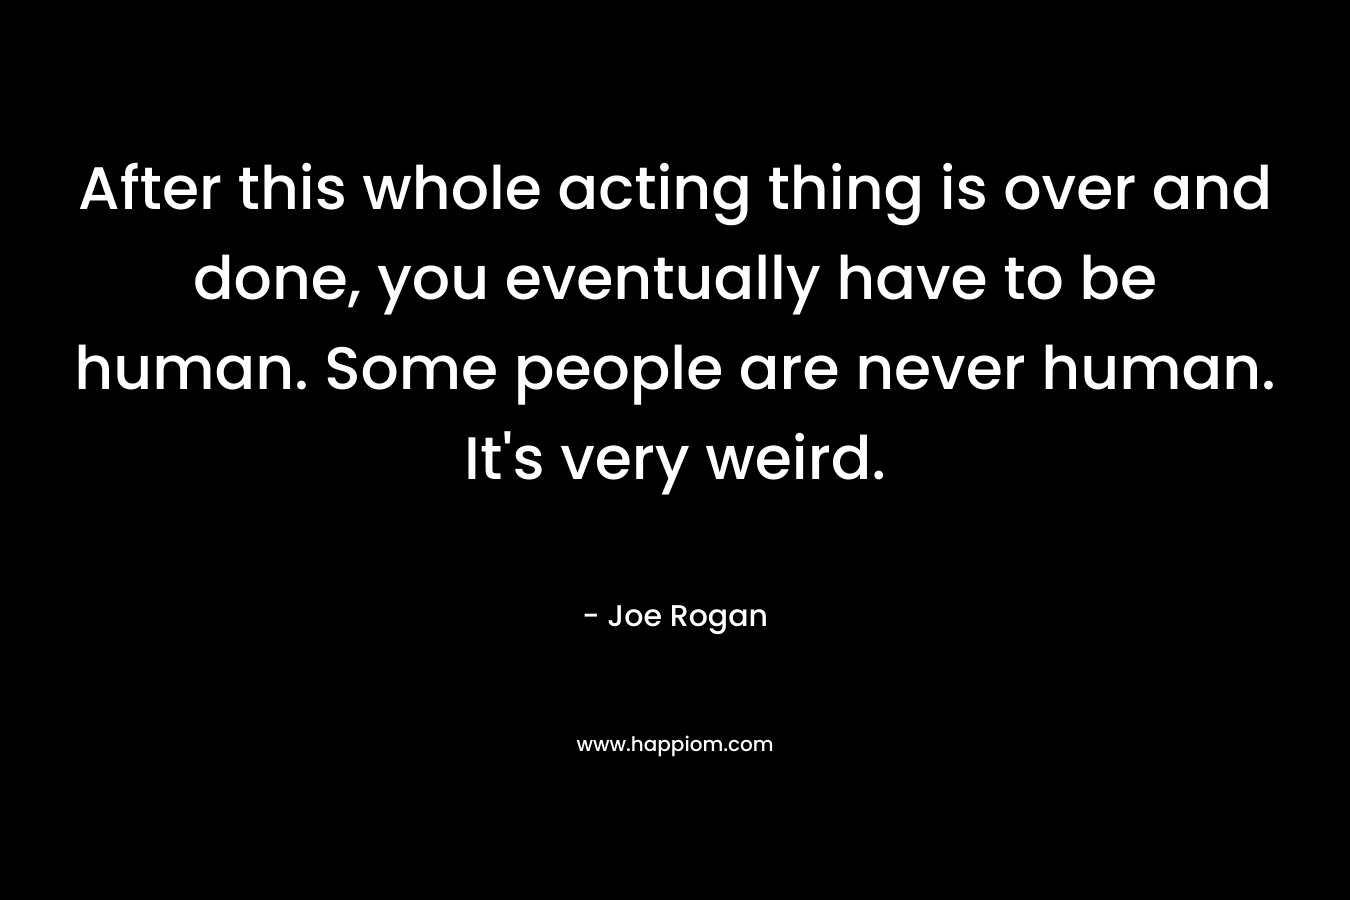 After this whole acting thing is over and done, you eventually have to be human. Some people are never human. It's very weird.